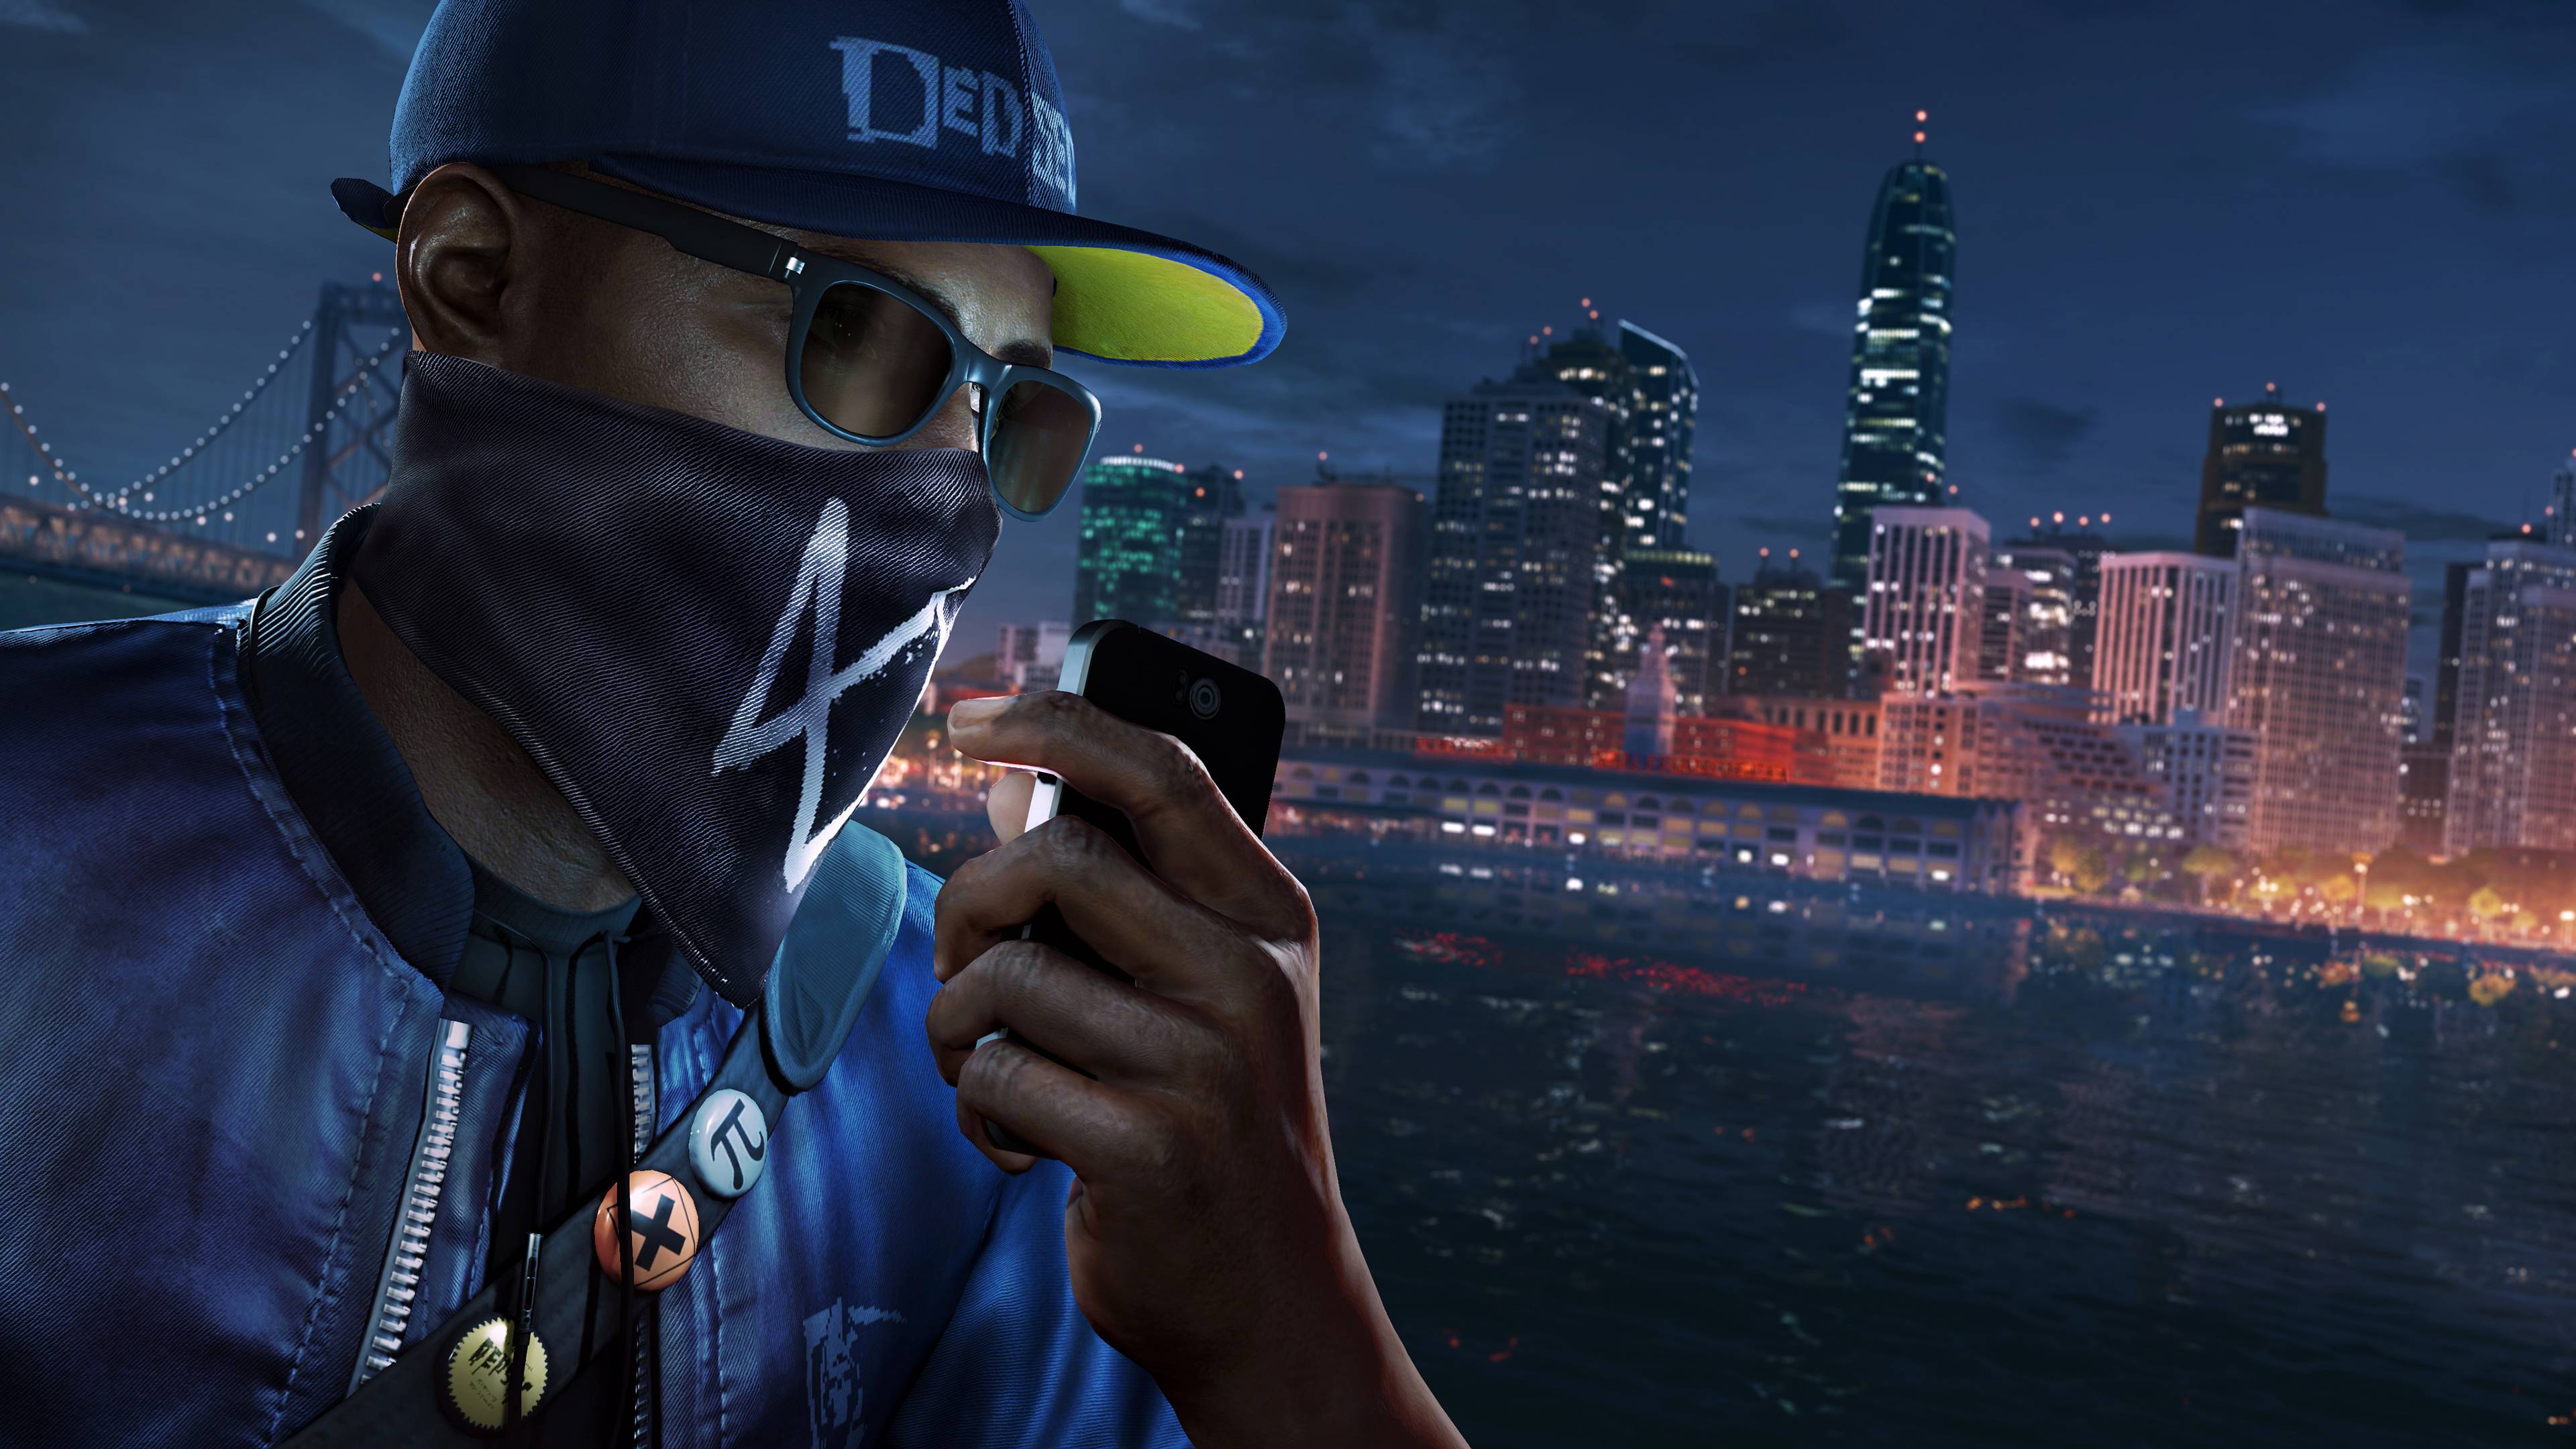 watch dogs free ps4